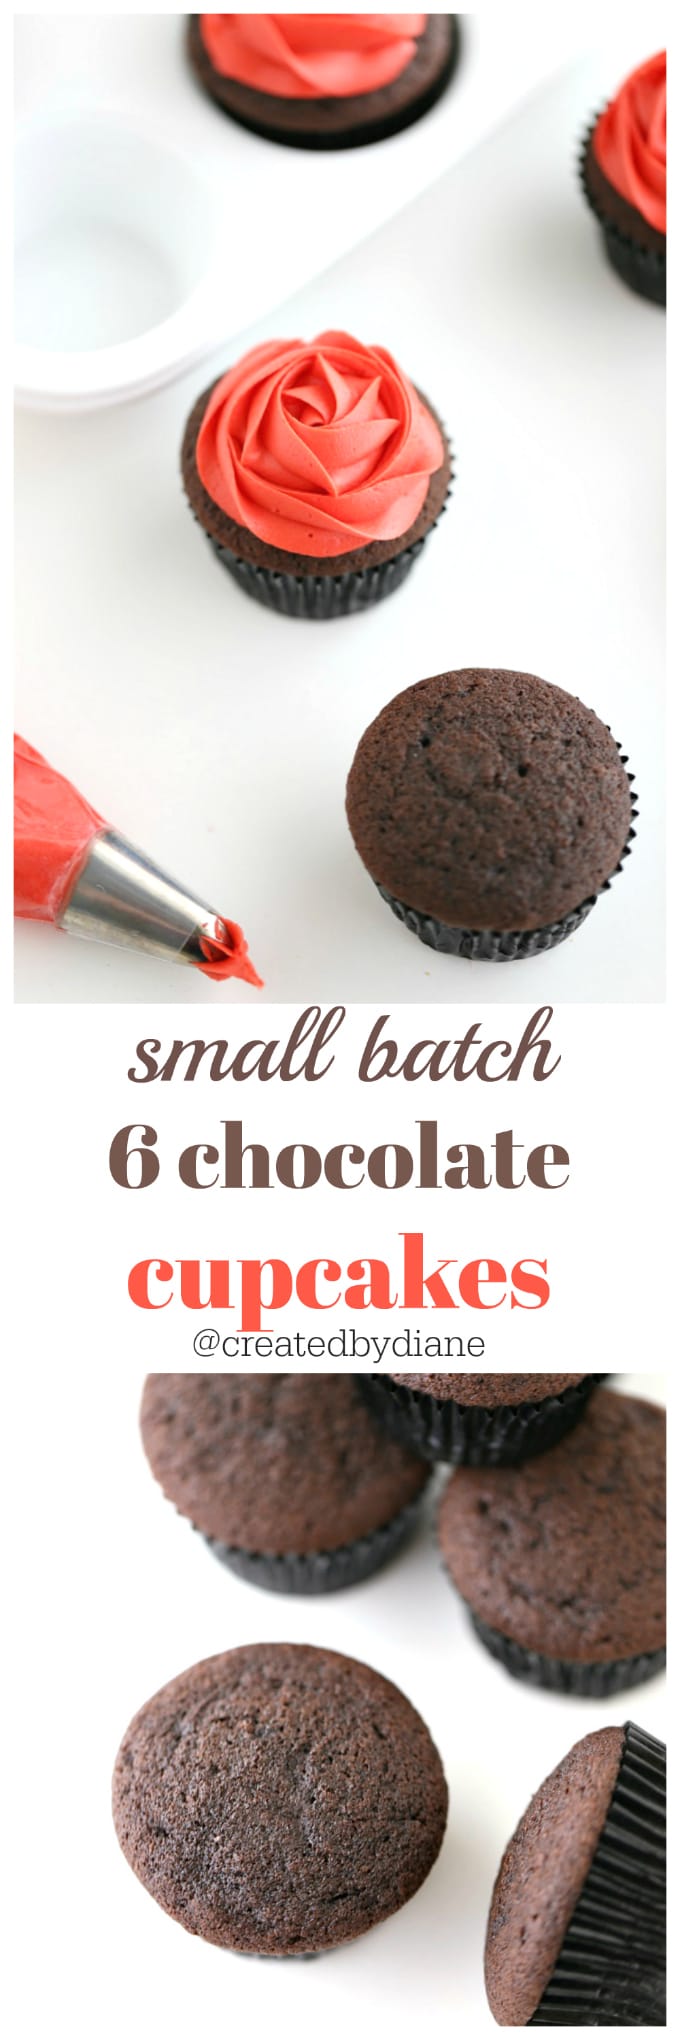 small batch 6 chocolate cupcakes with frosting recipe too @createdbydiane